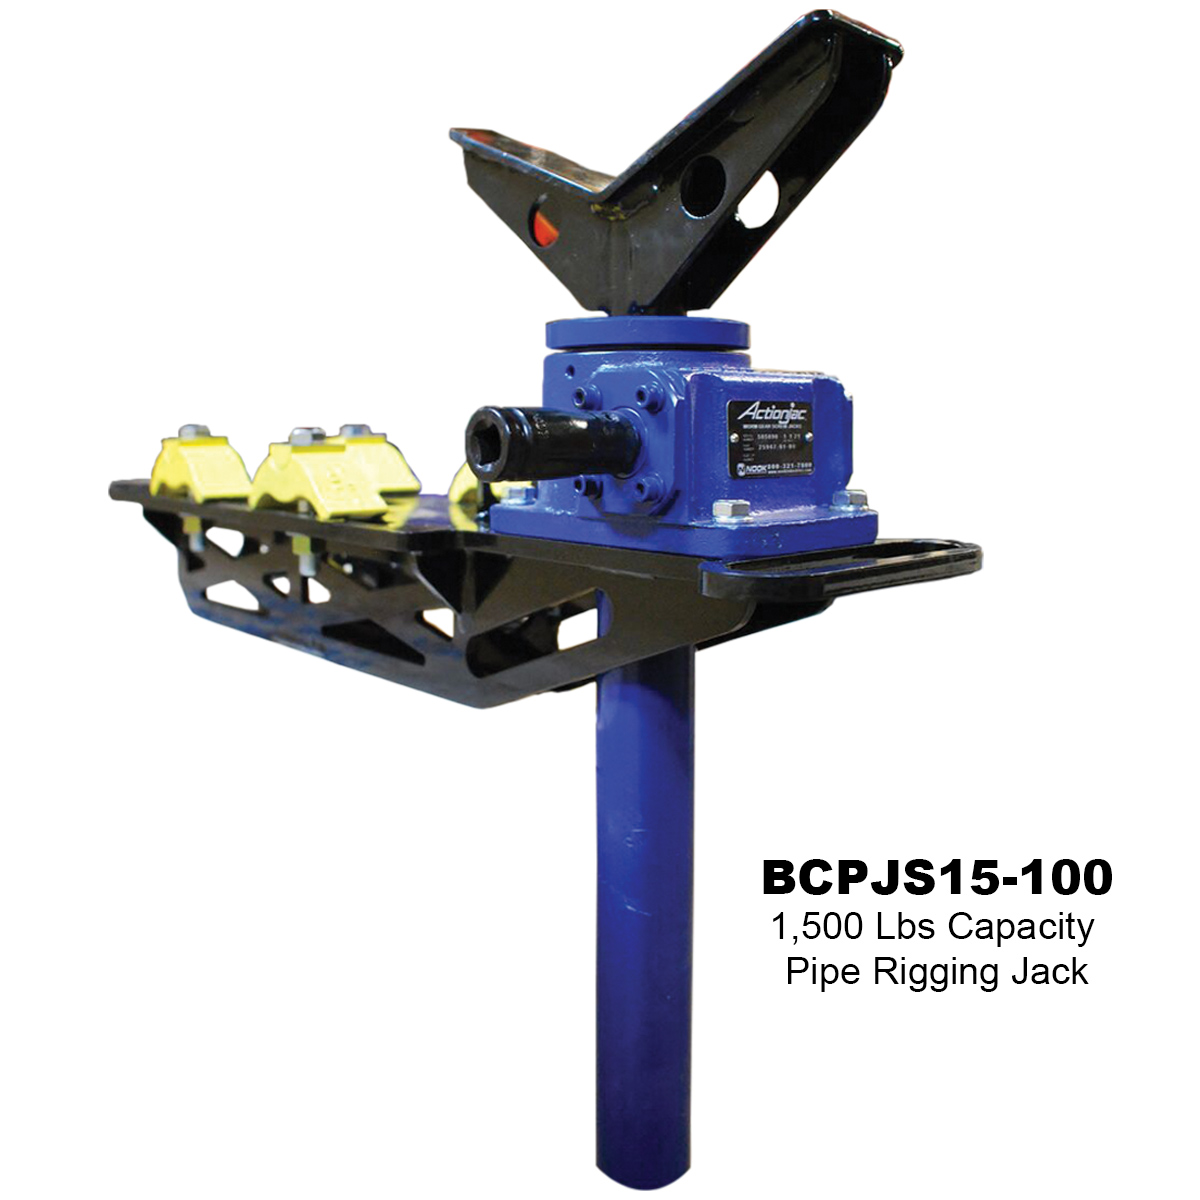 1,500 lbs pipe rigging jack